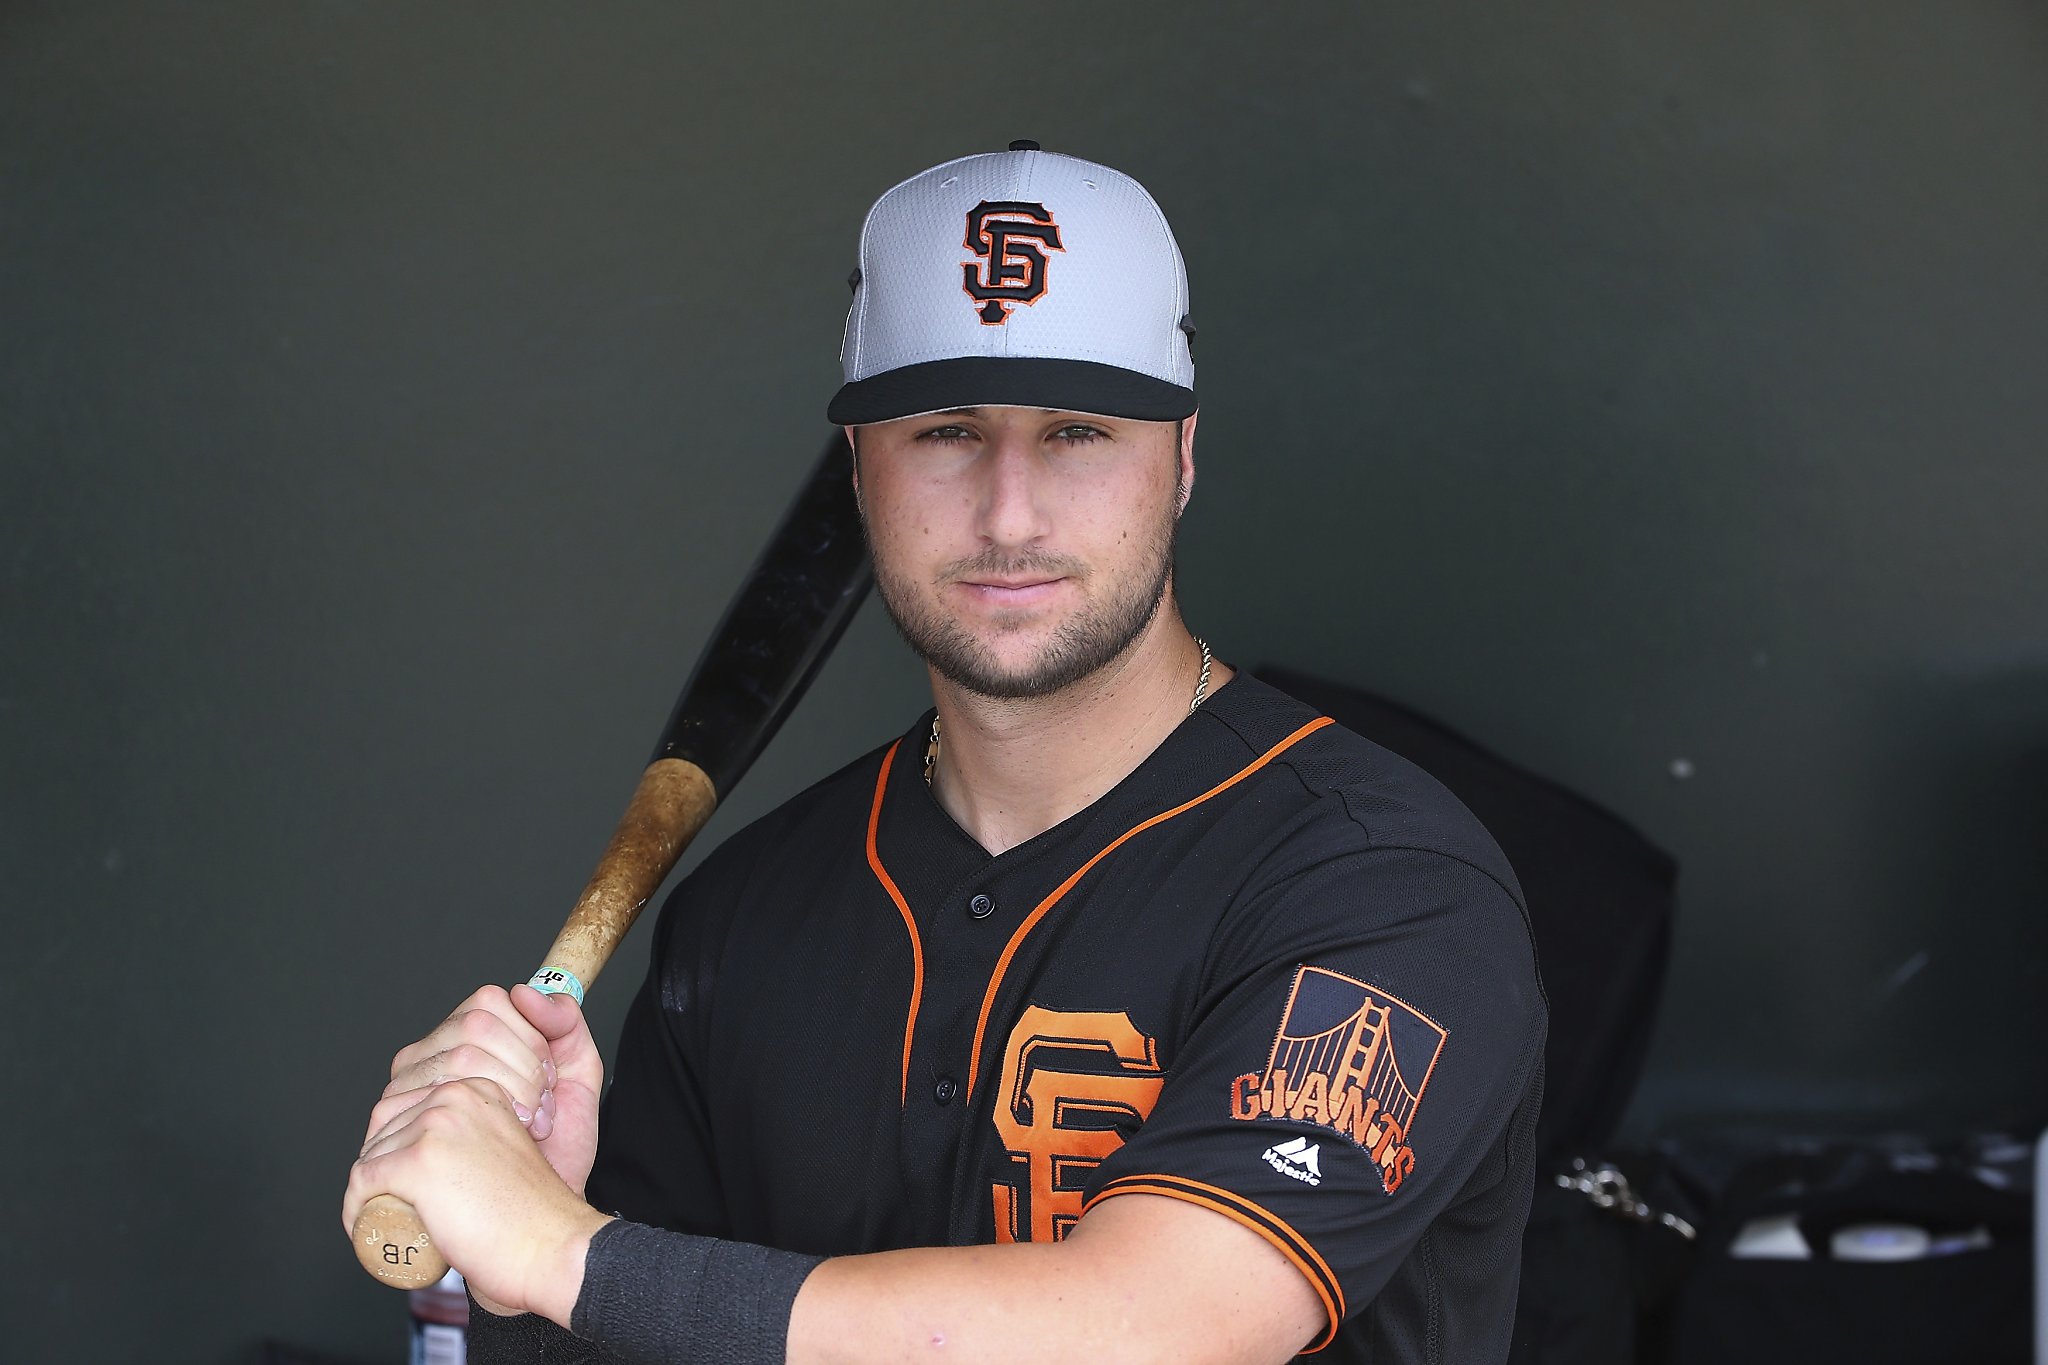 Two weeks after preaching patience, Giants call up star prospect Joey Bart